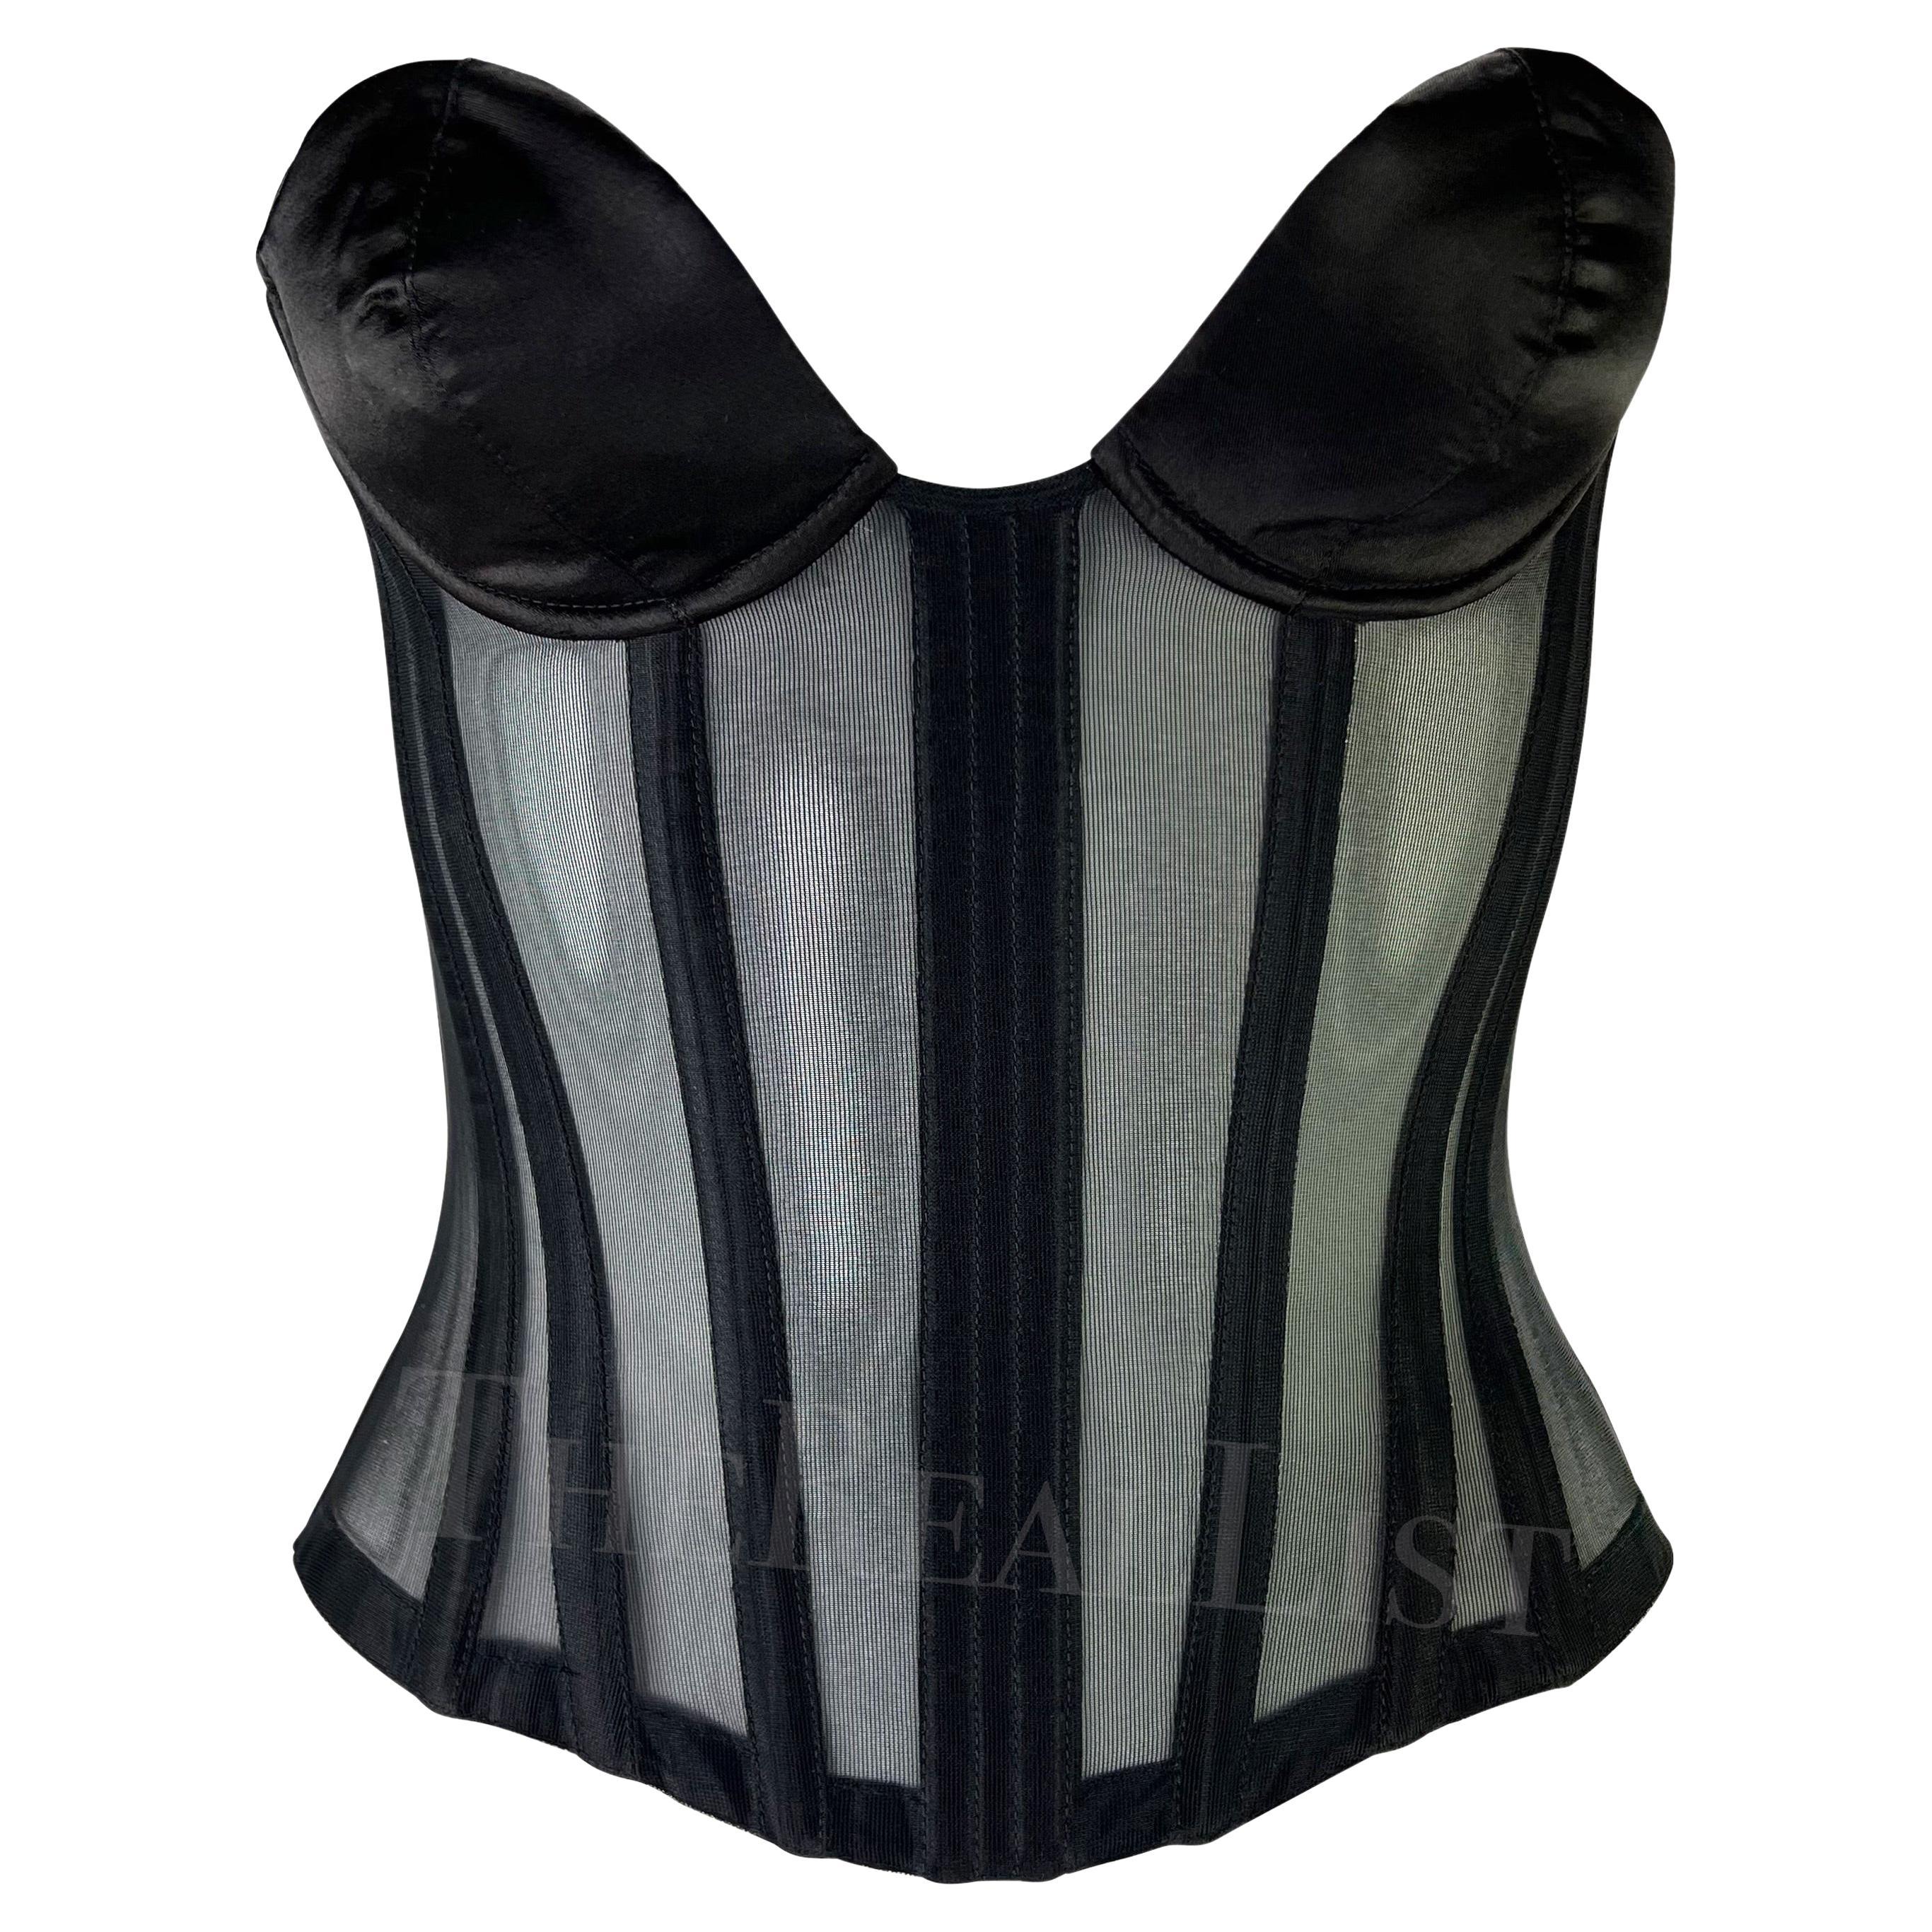 Late 1990s Thierry Mugler Lace-Up Sheer Black Satin Mr. Pearl Corset For Sale